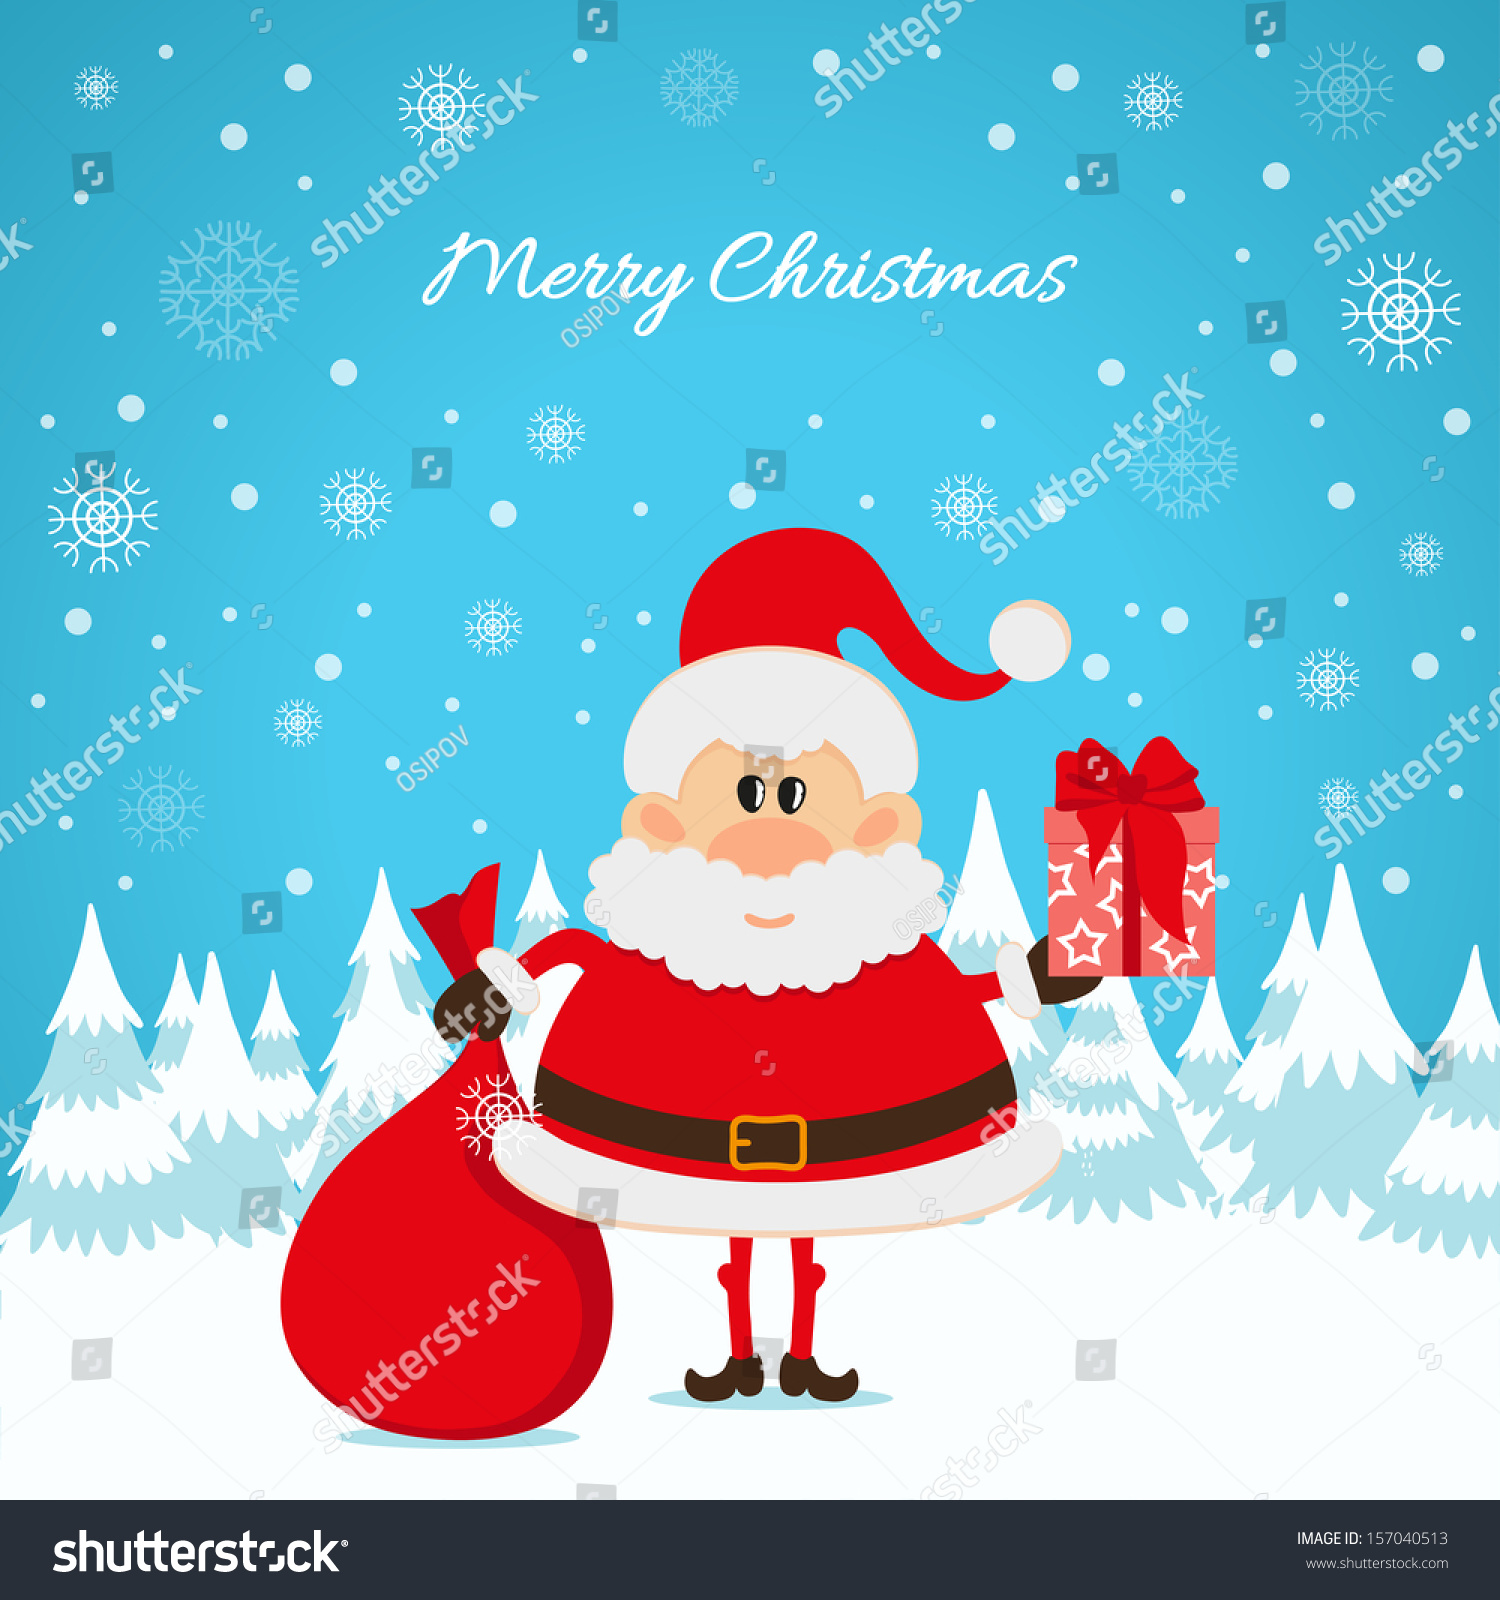 Santa Claus with a red bag and ts The Christmas card